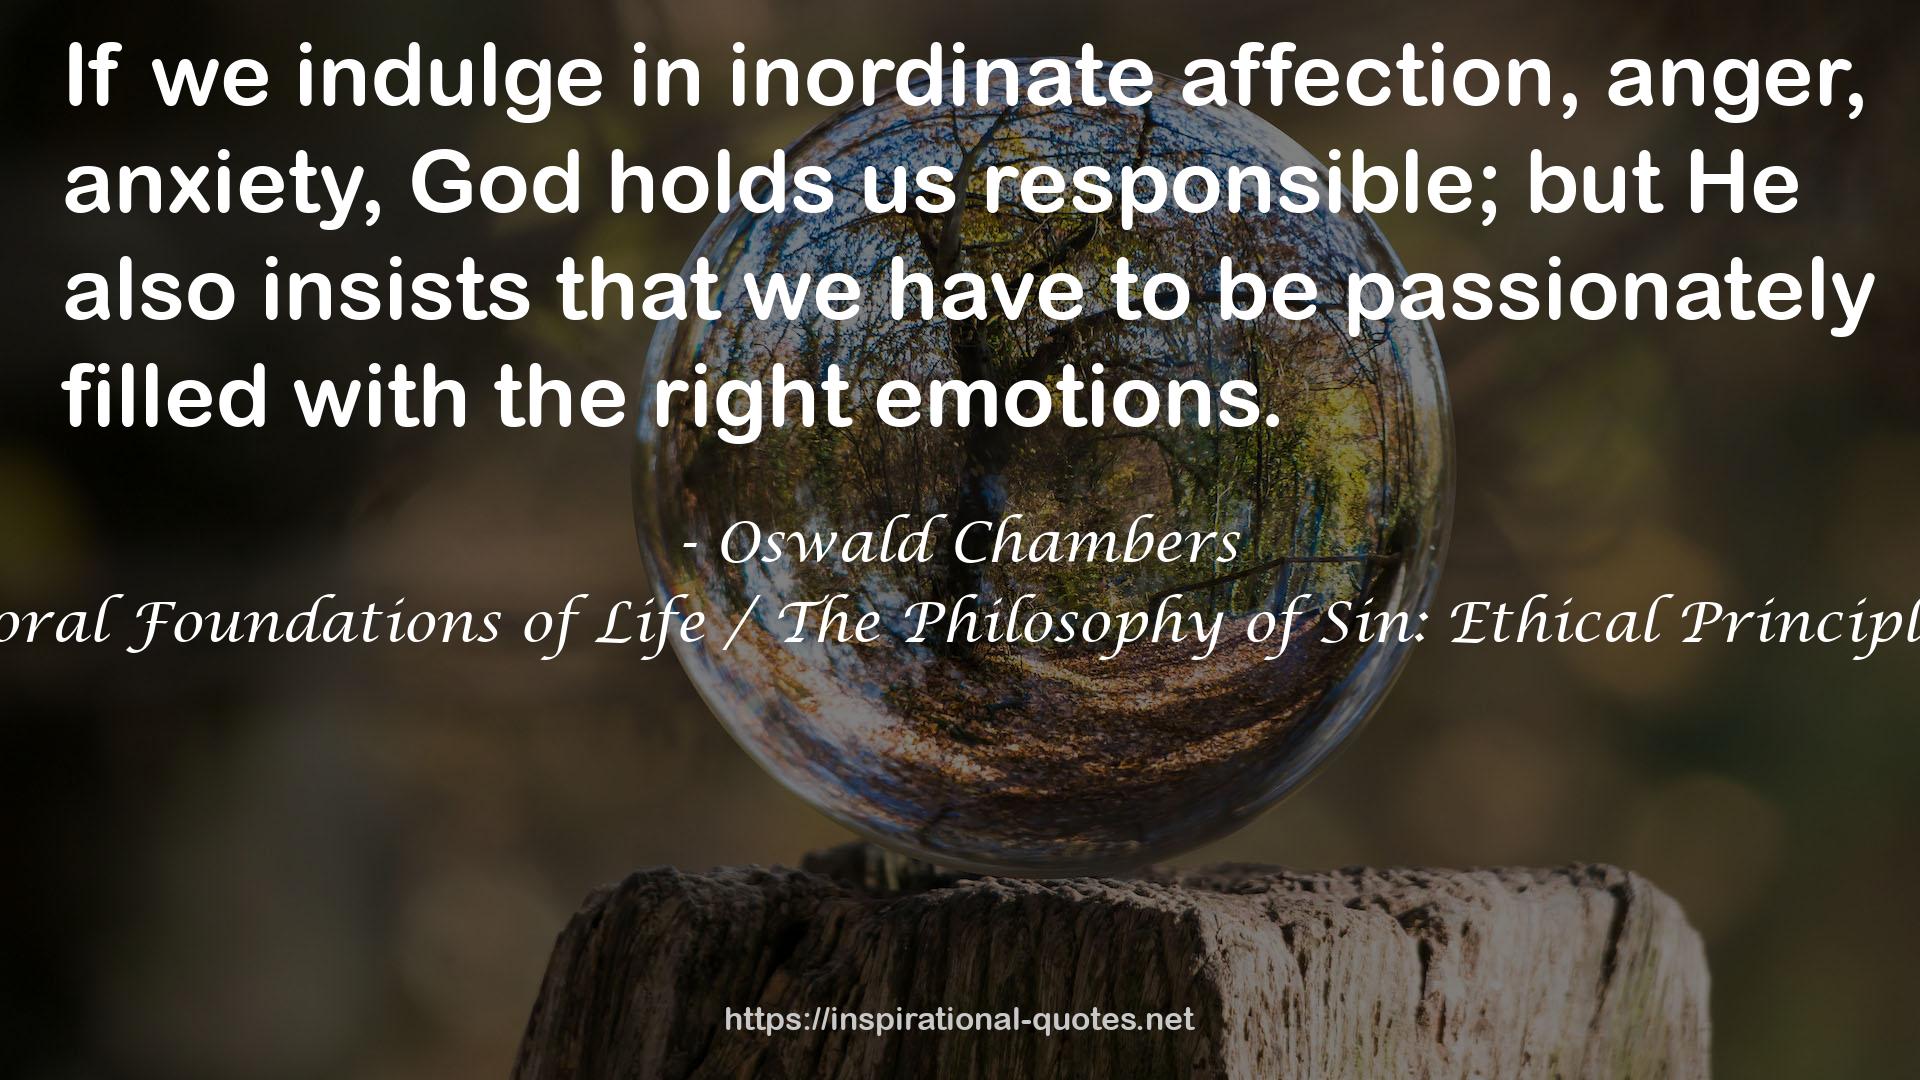 Biblical Ethics / The Moral Foundations of Life / The Philosophy of Sin: Ethical Principles for the Christian Life QUOTES